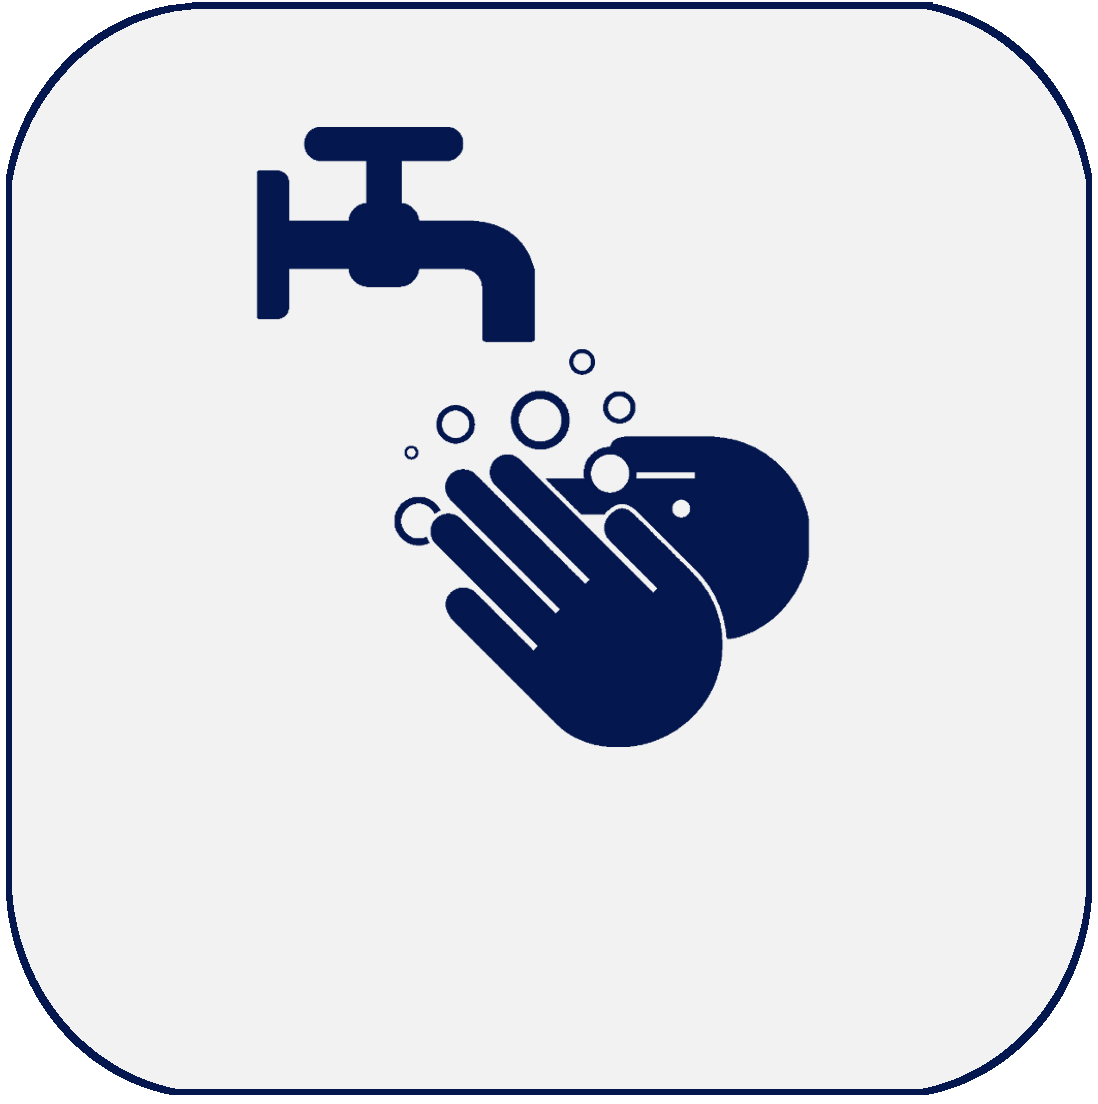 Handwashing icon for public health achievement Control of Infectious Diseases